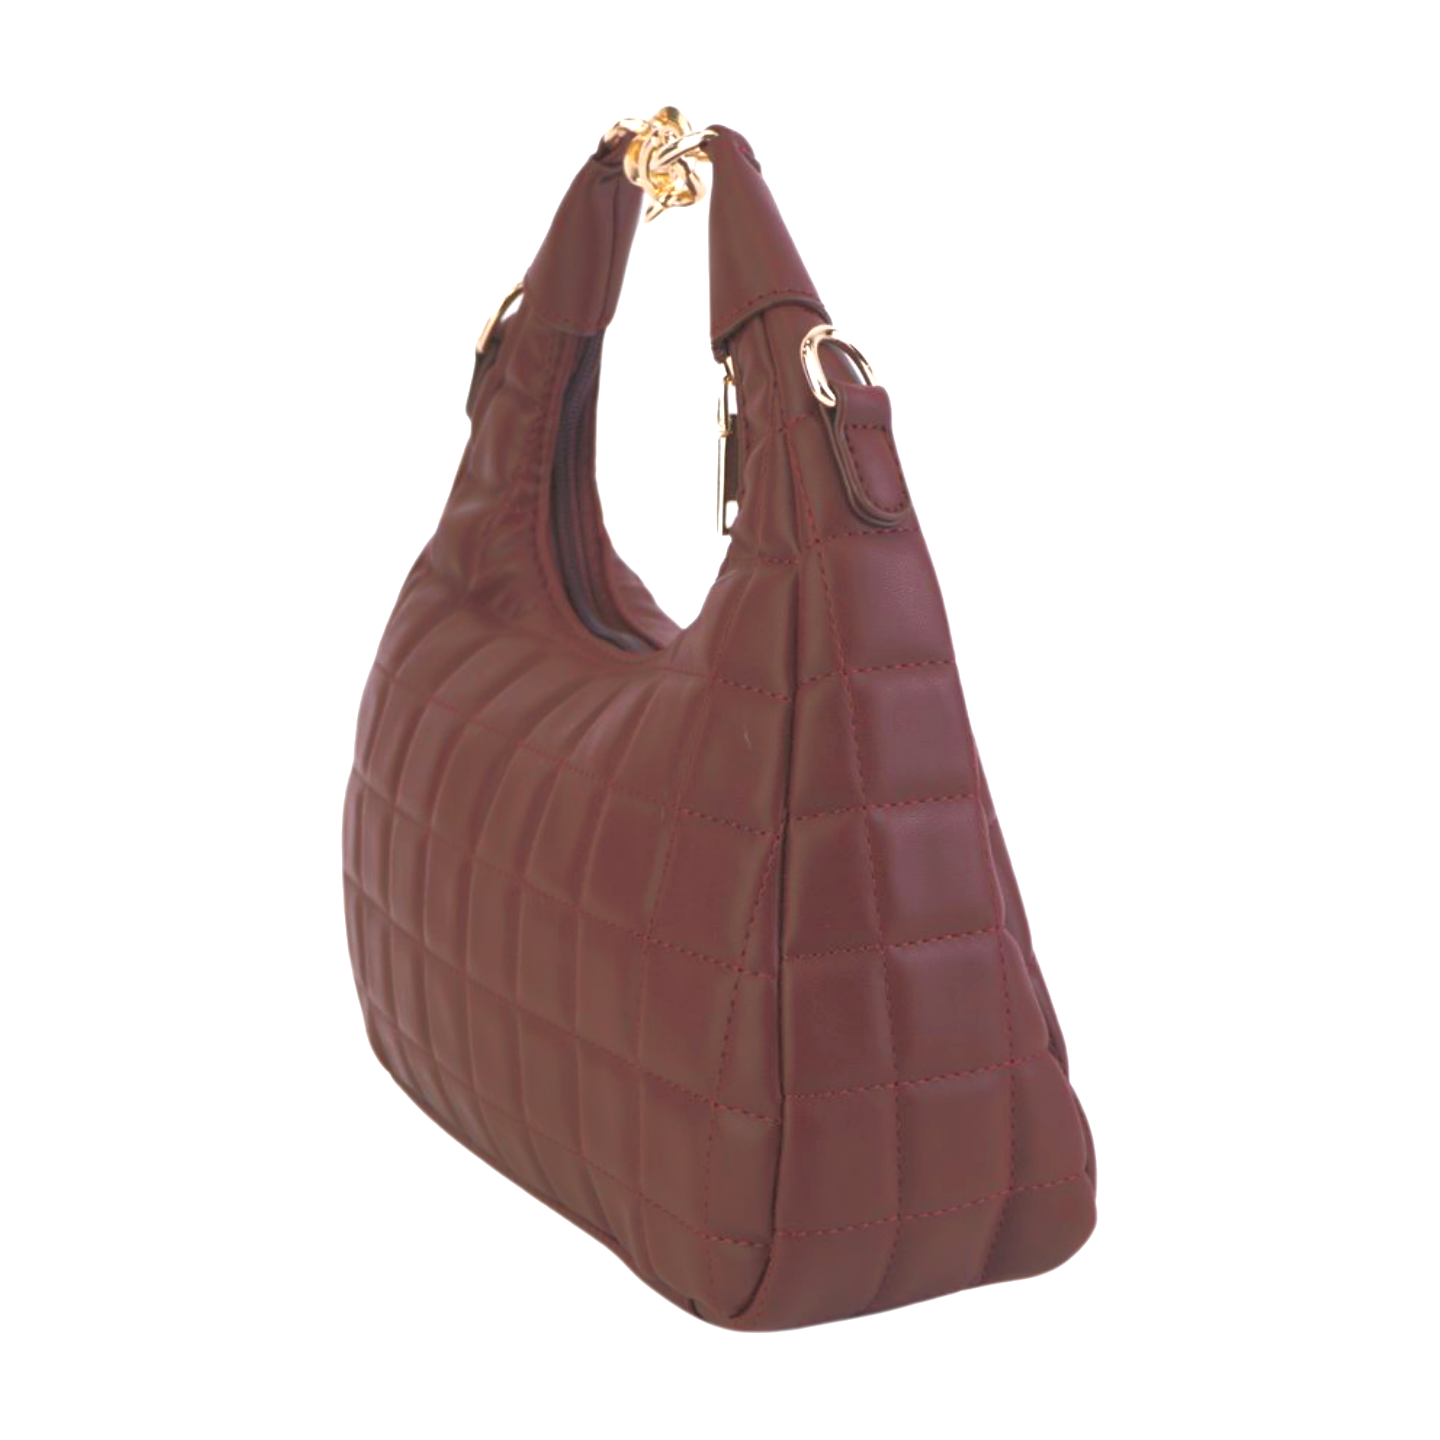 Quilted Hobo Bag with Gold Chain Handle and Shoulder Strap